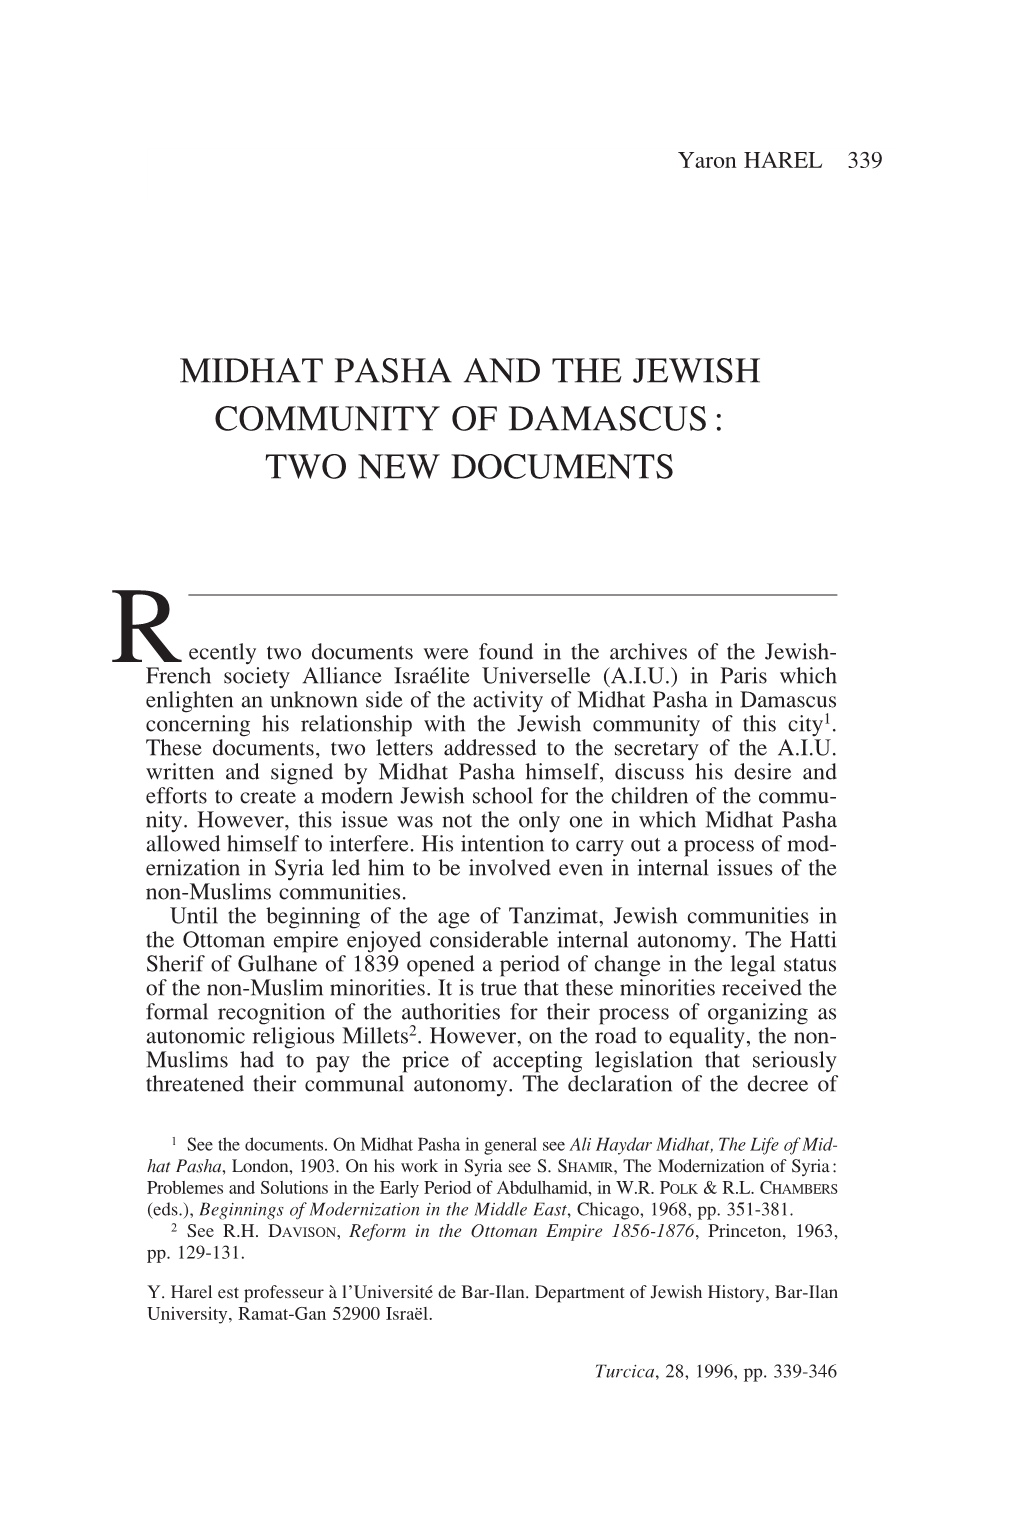 Midhat Pasha and the Jewish Community of Damascus: Two New Documents